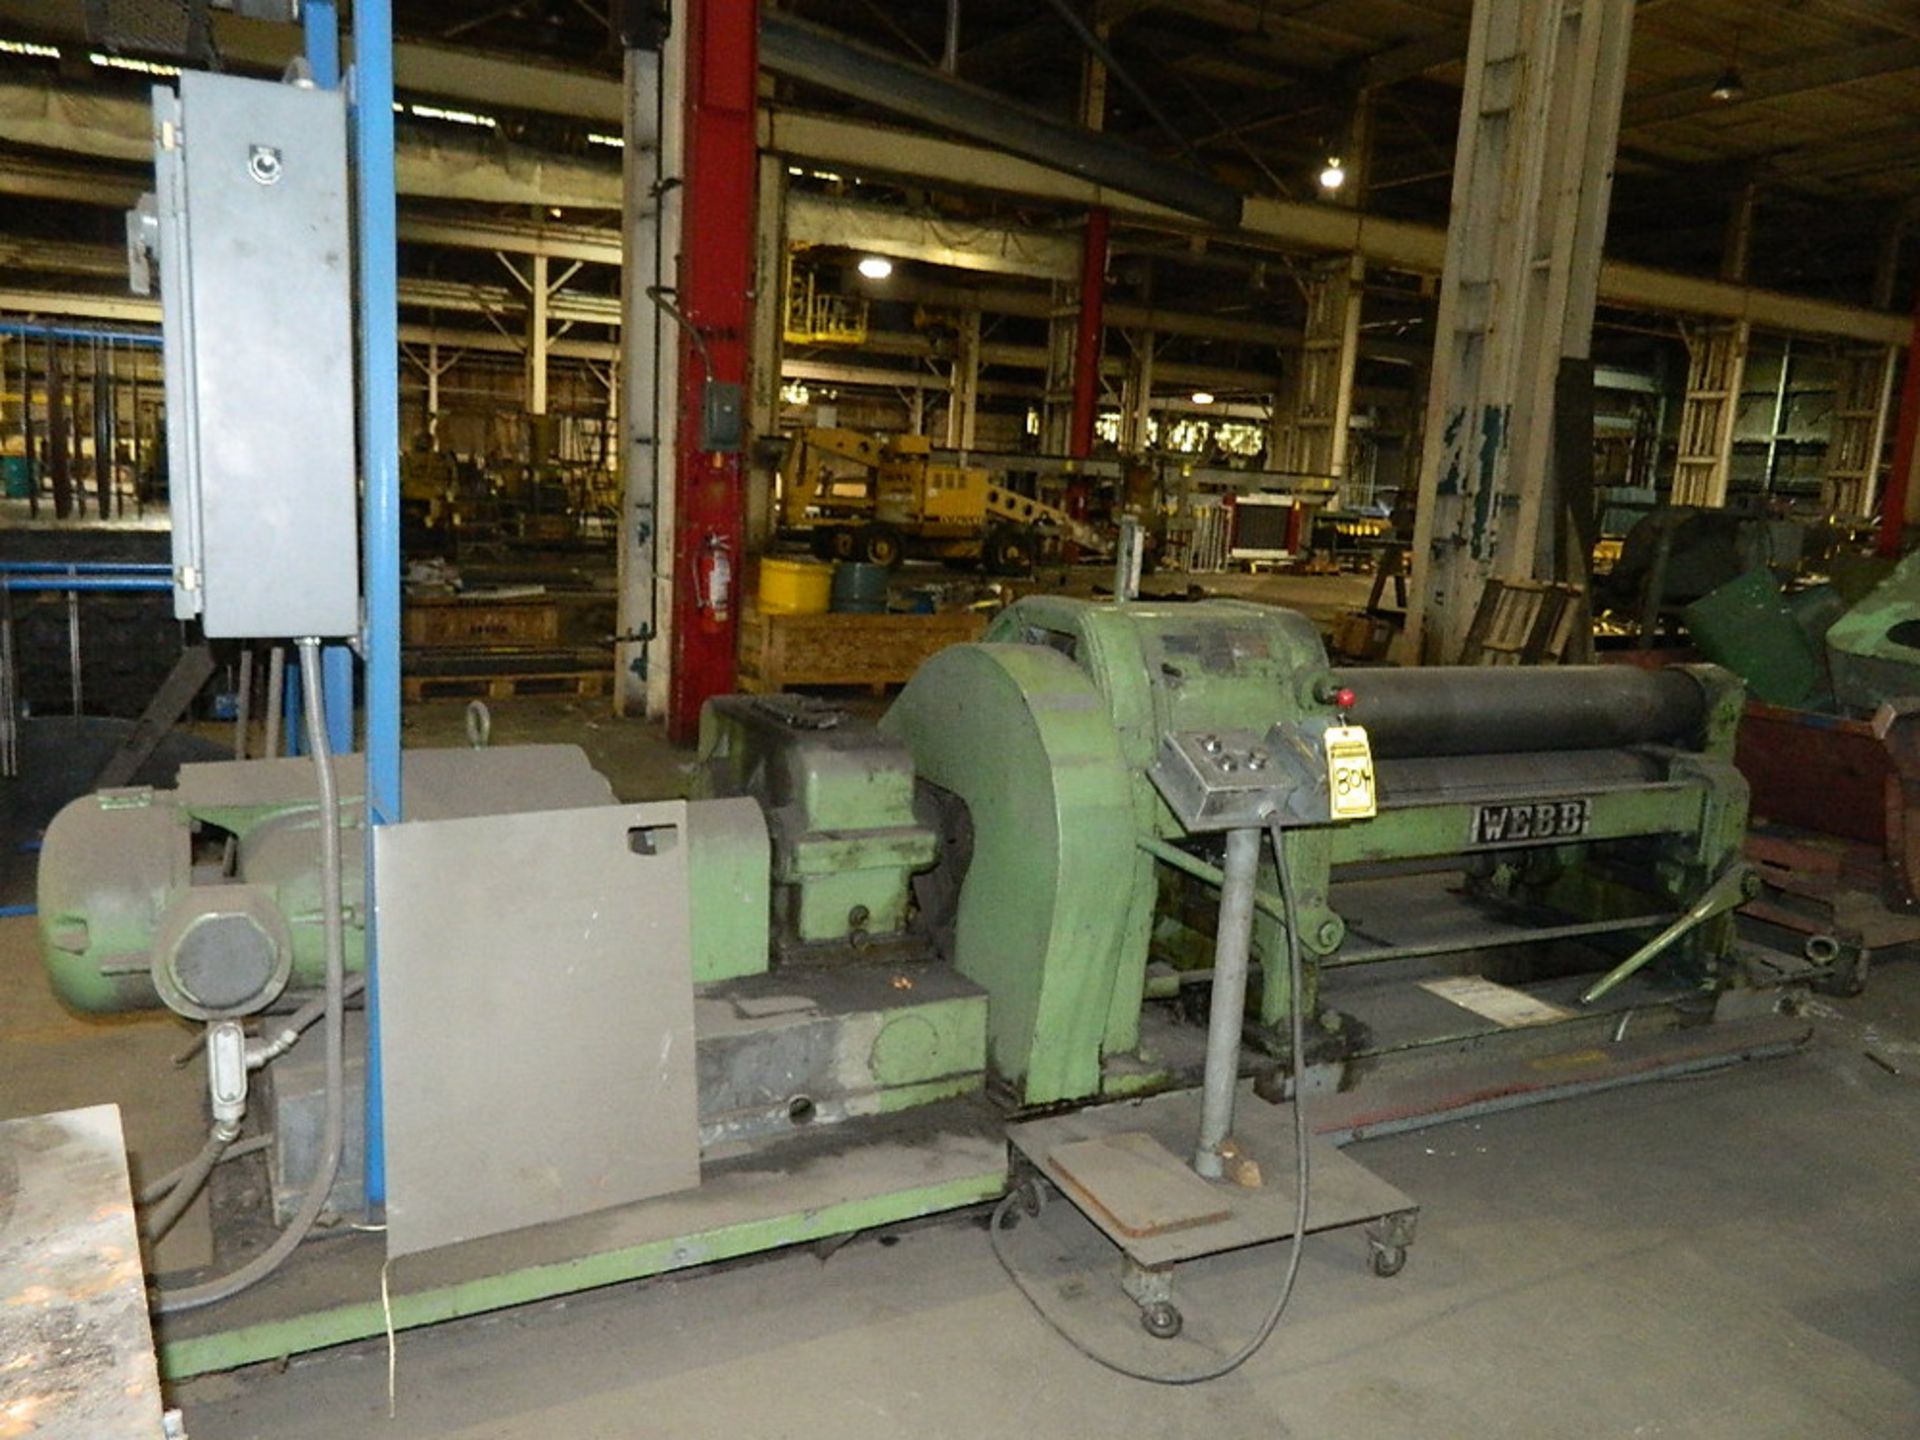 Webb Initial Pinch Power Roll, 5/8" x 4', Mdl: 6L, S/N: 53122 - Painesville, OH - 7262P